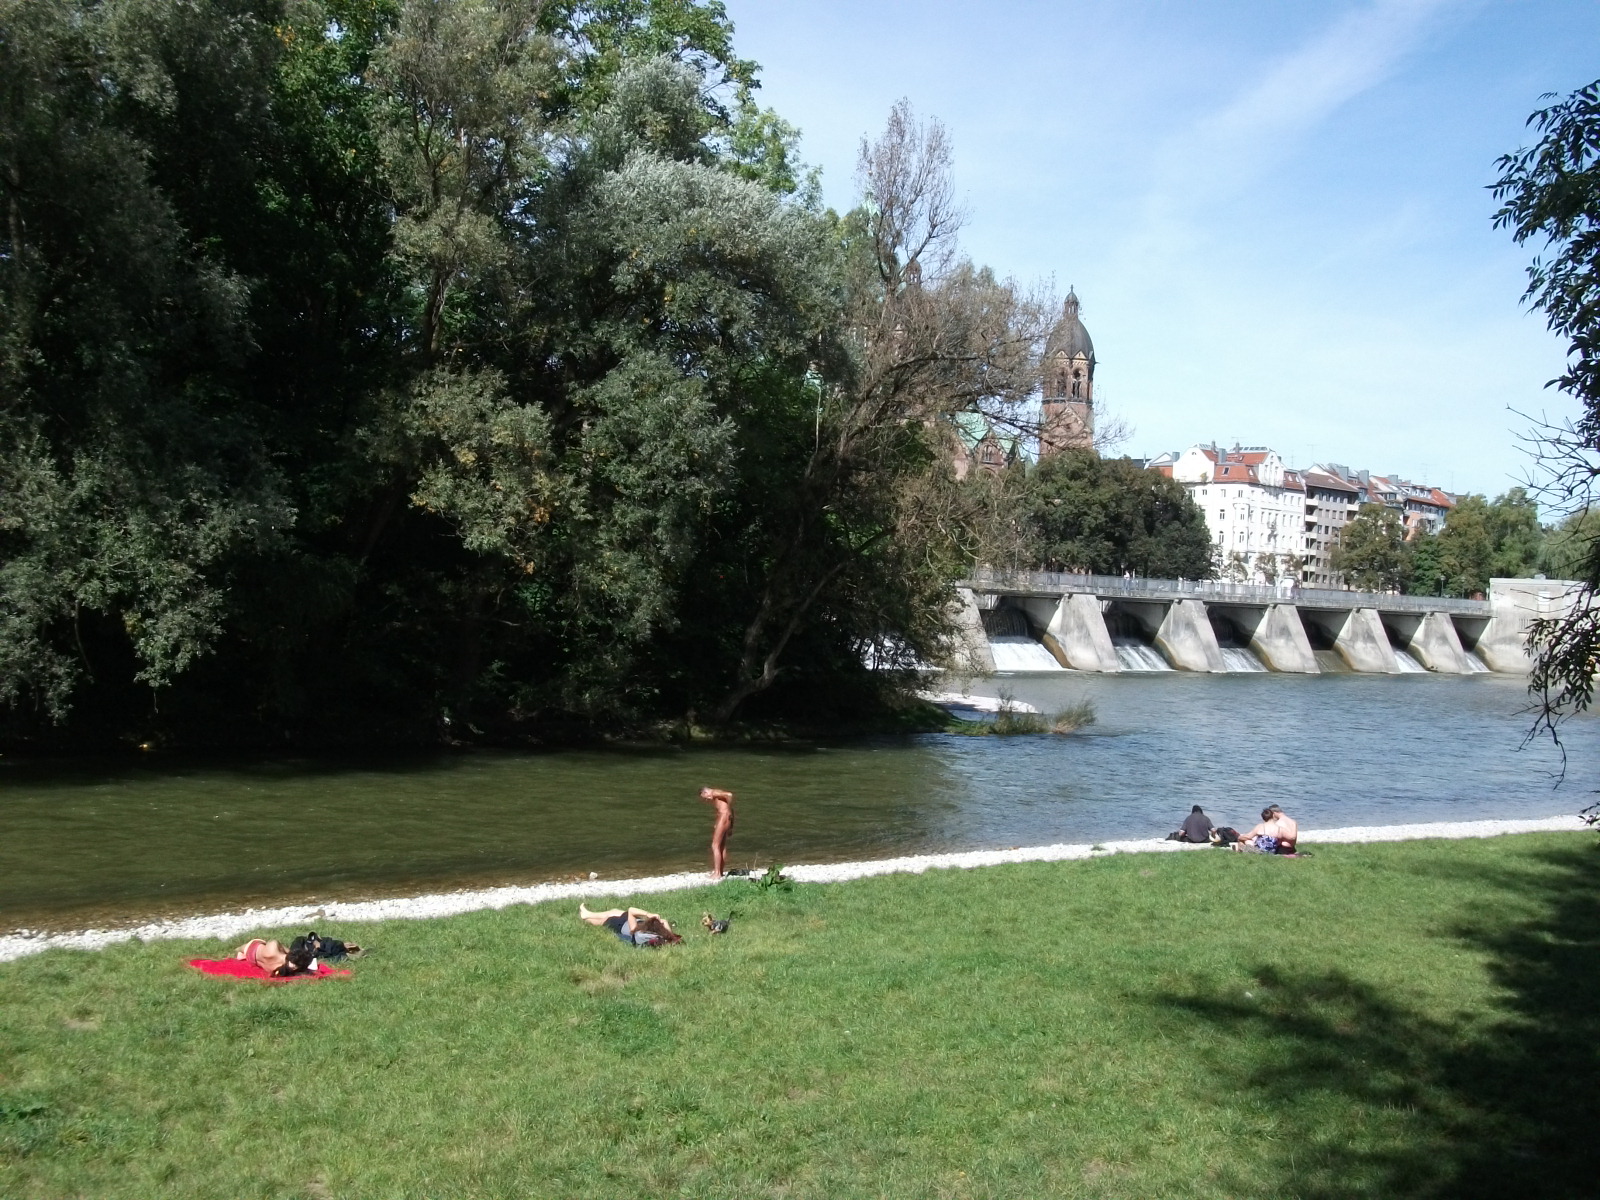 A Londoner from Afar Goes to Munich1 - Isar River 